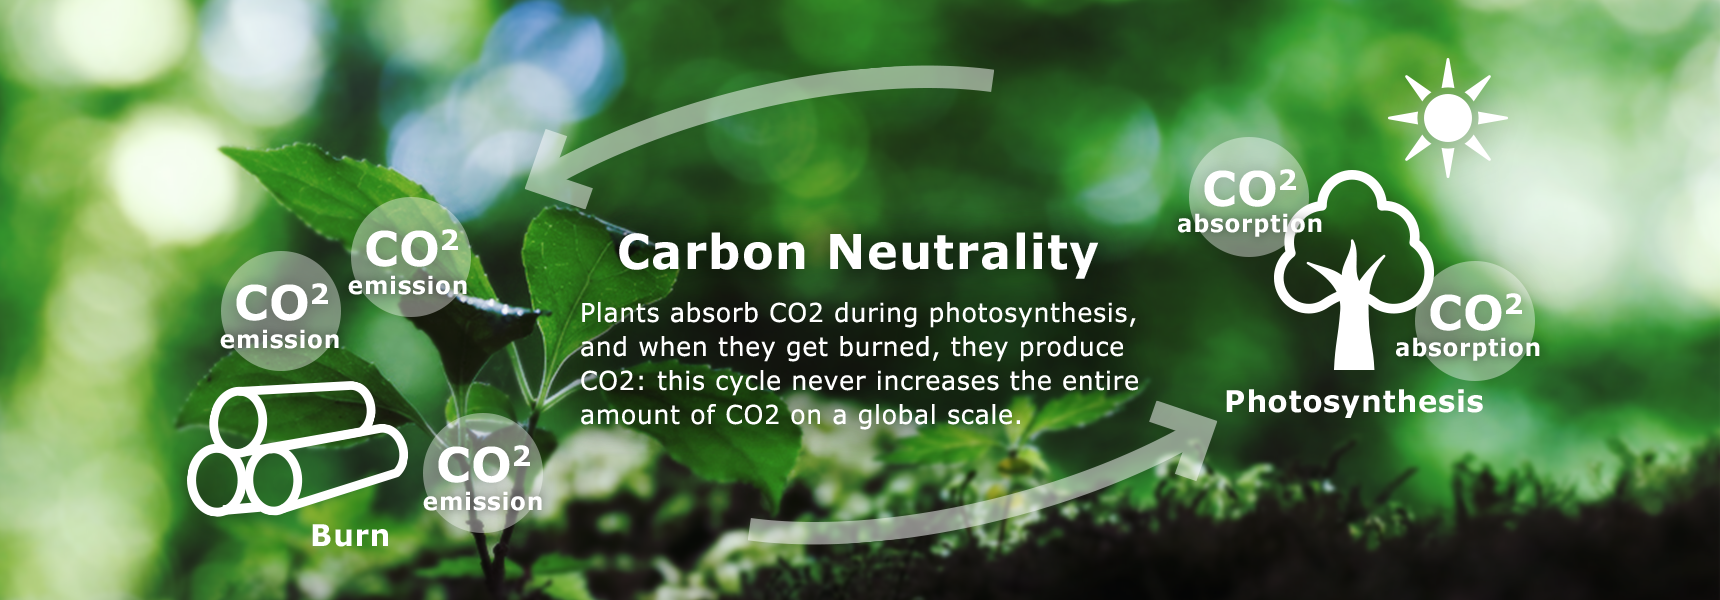 Carbon Neutrality Plants absorb CO2 during photosynthesis, and when they get burned, they produce CO2: this cycle never increases the entire amount of CO2 on a global scale.